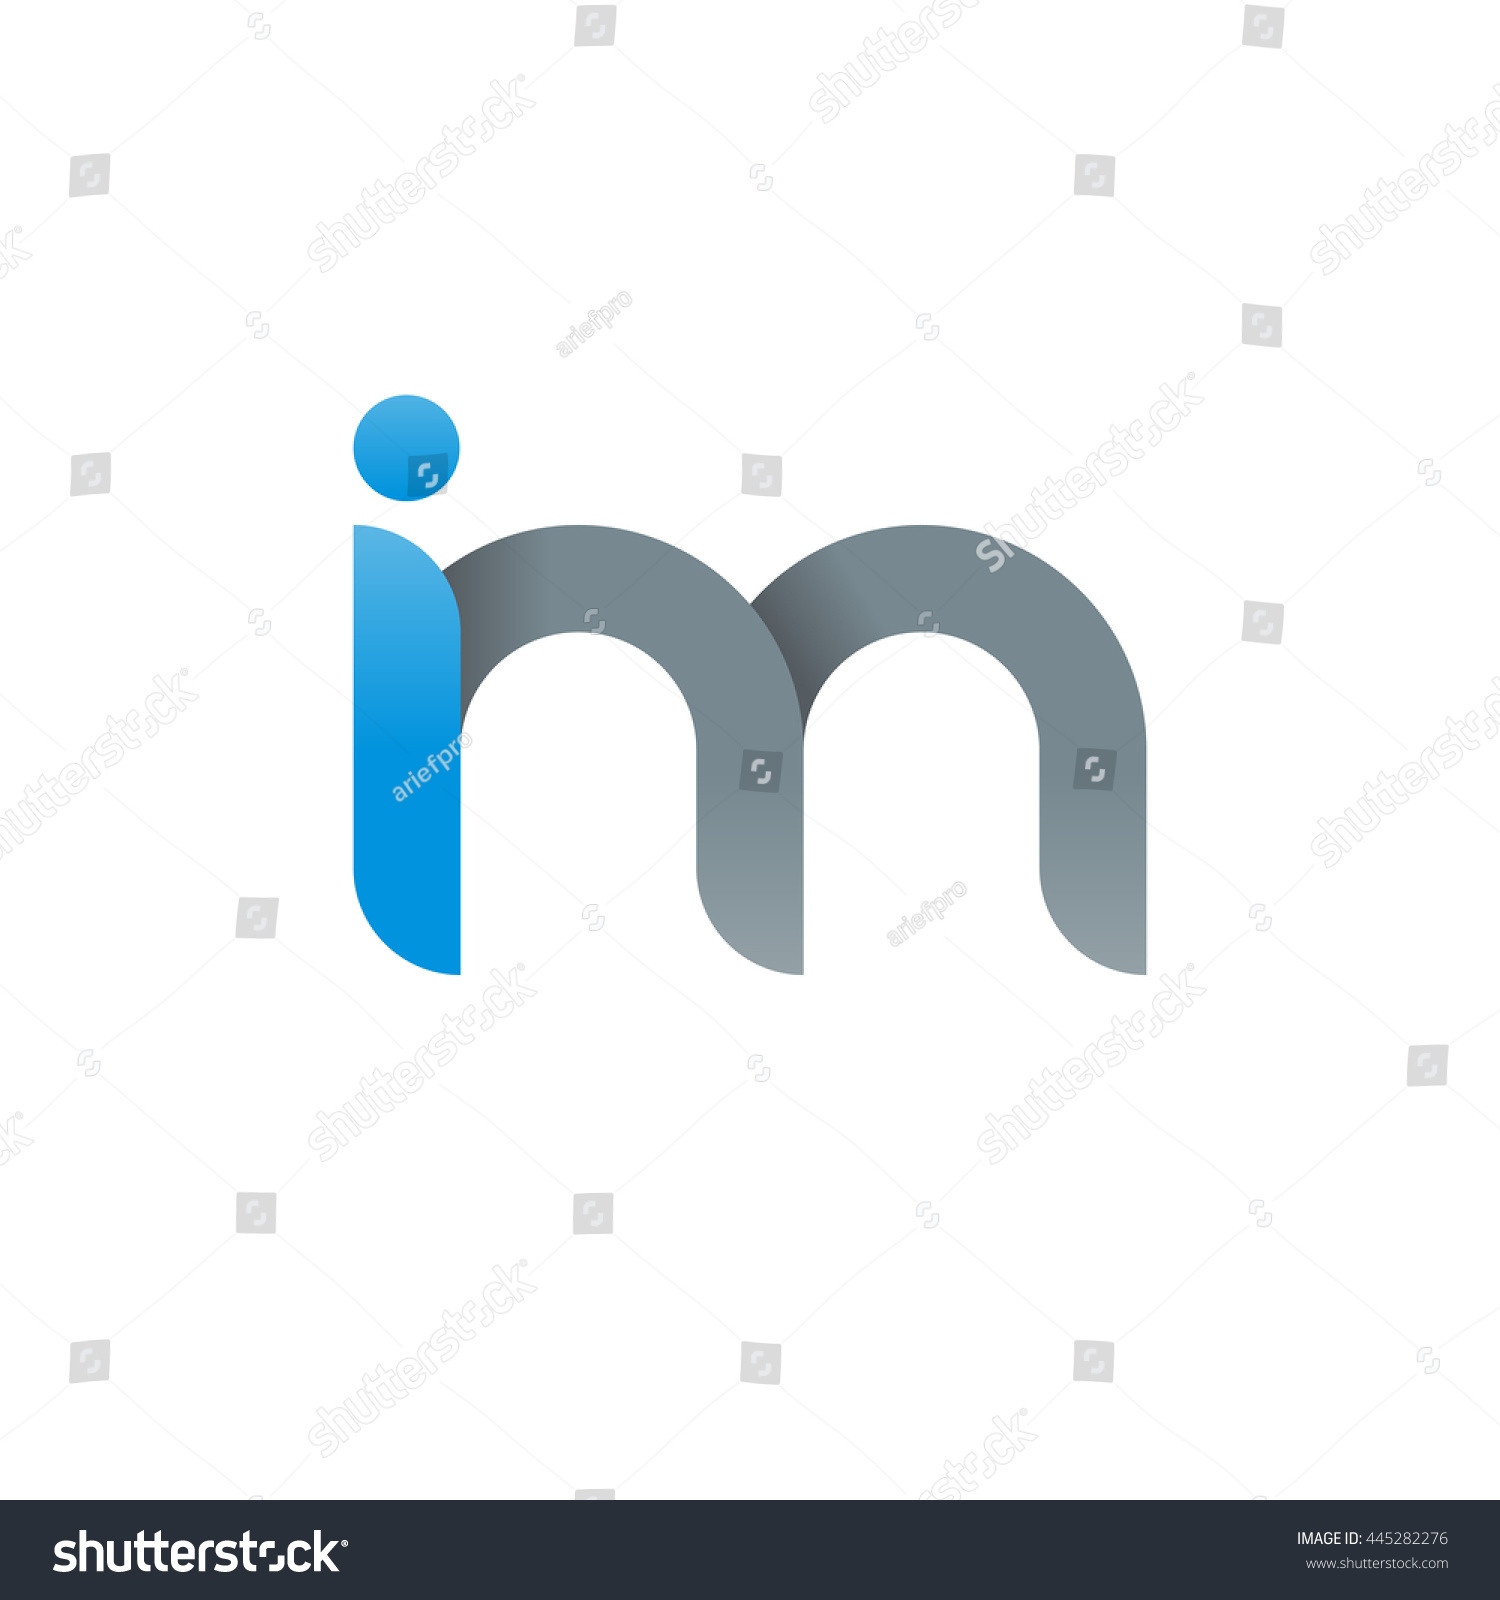 Initial Letter Im Modern Linked Circle Stock Vector ...